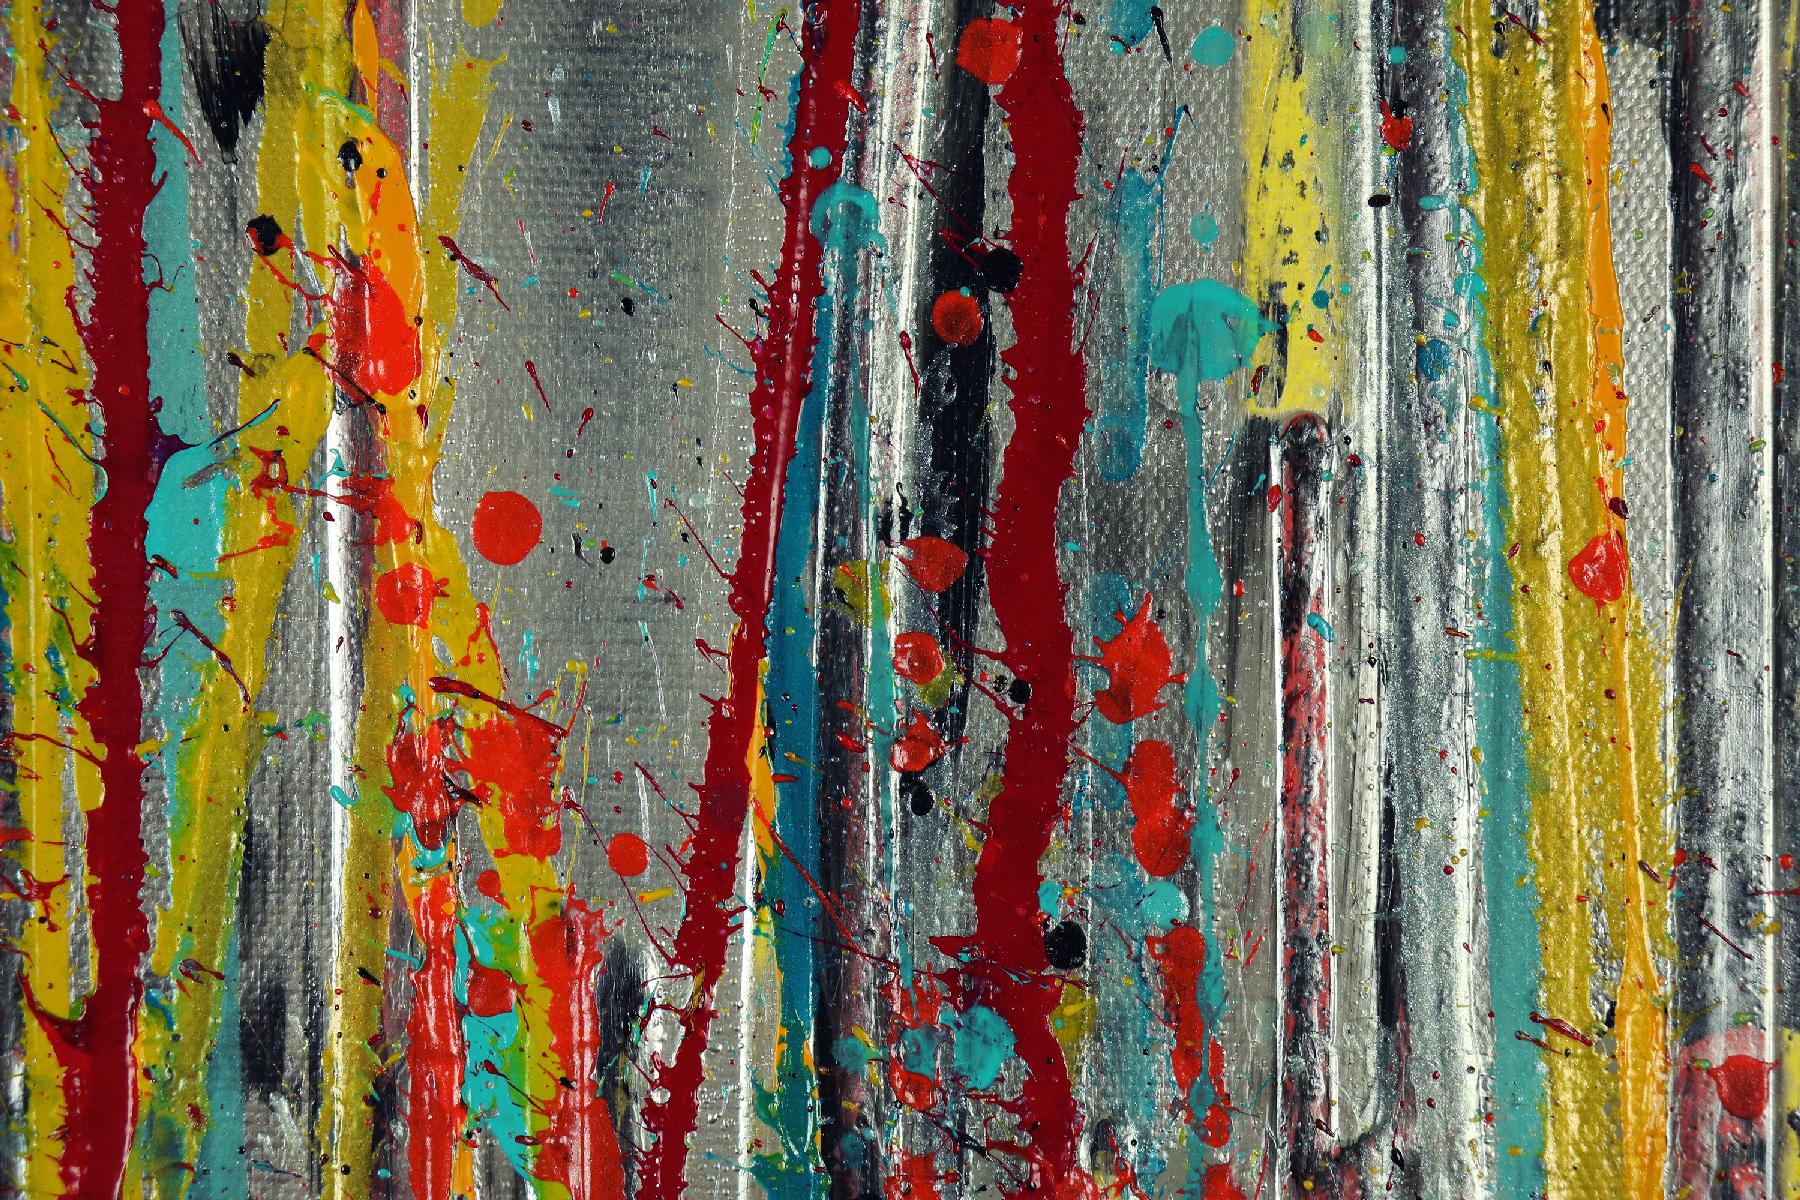 SOLD - A Closer Look (Emotional Expression) 2 (2020)